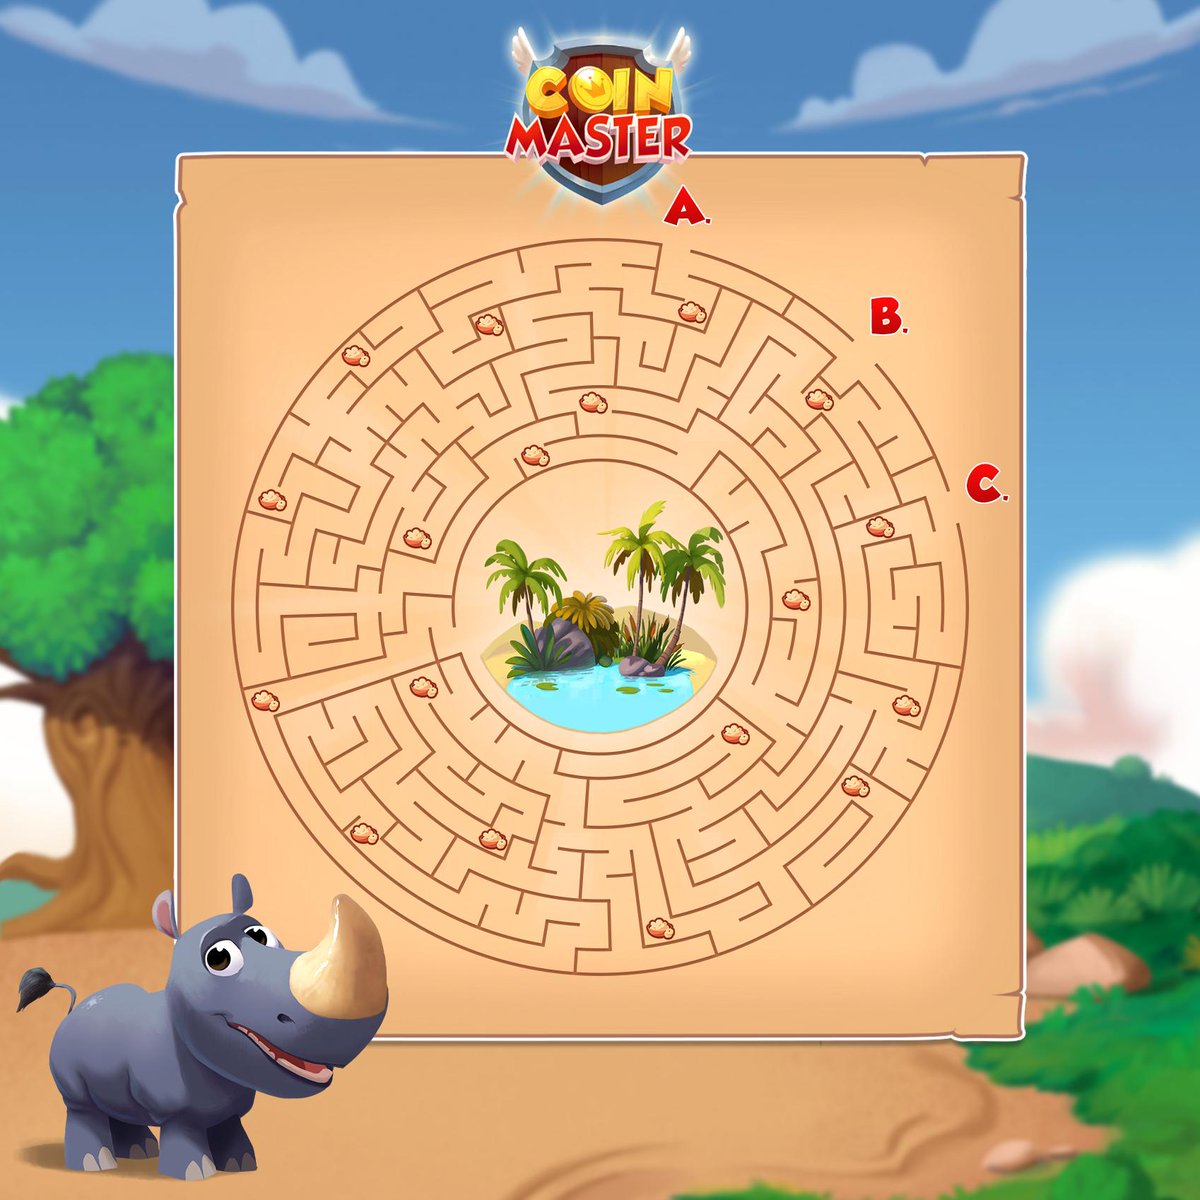 Coin Master On Twitter Save The Rhino Day Is Here Which Path Leads Our Cute Little Friend To The Center Bonus Points If You Can Count All The Pet Food